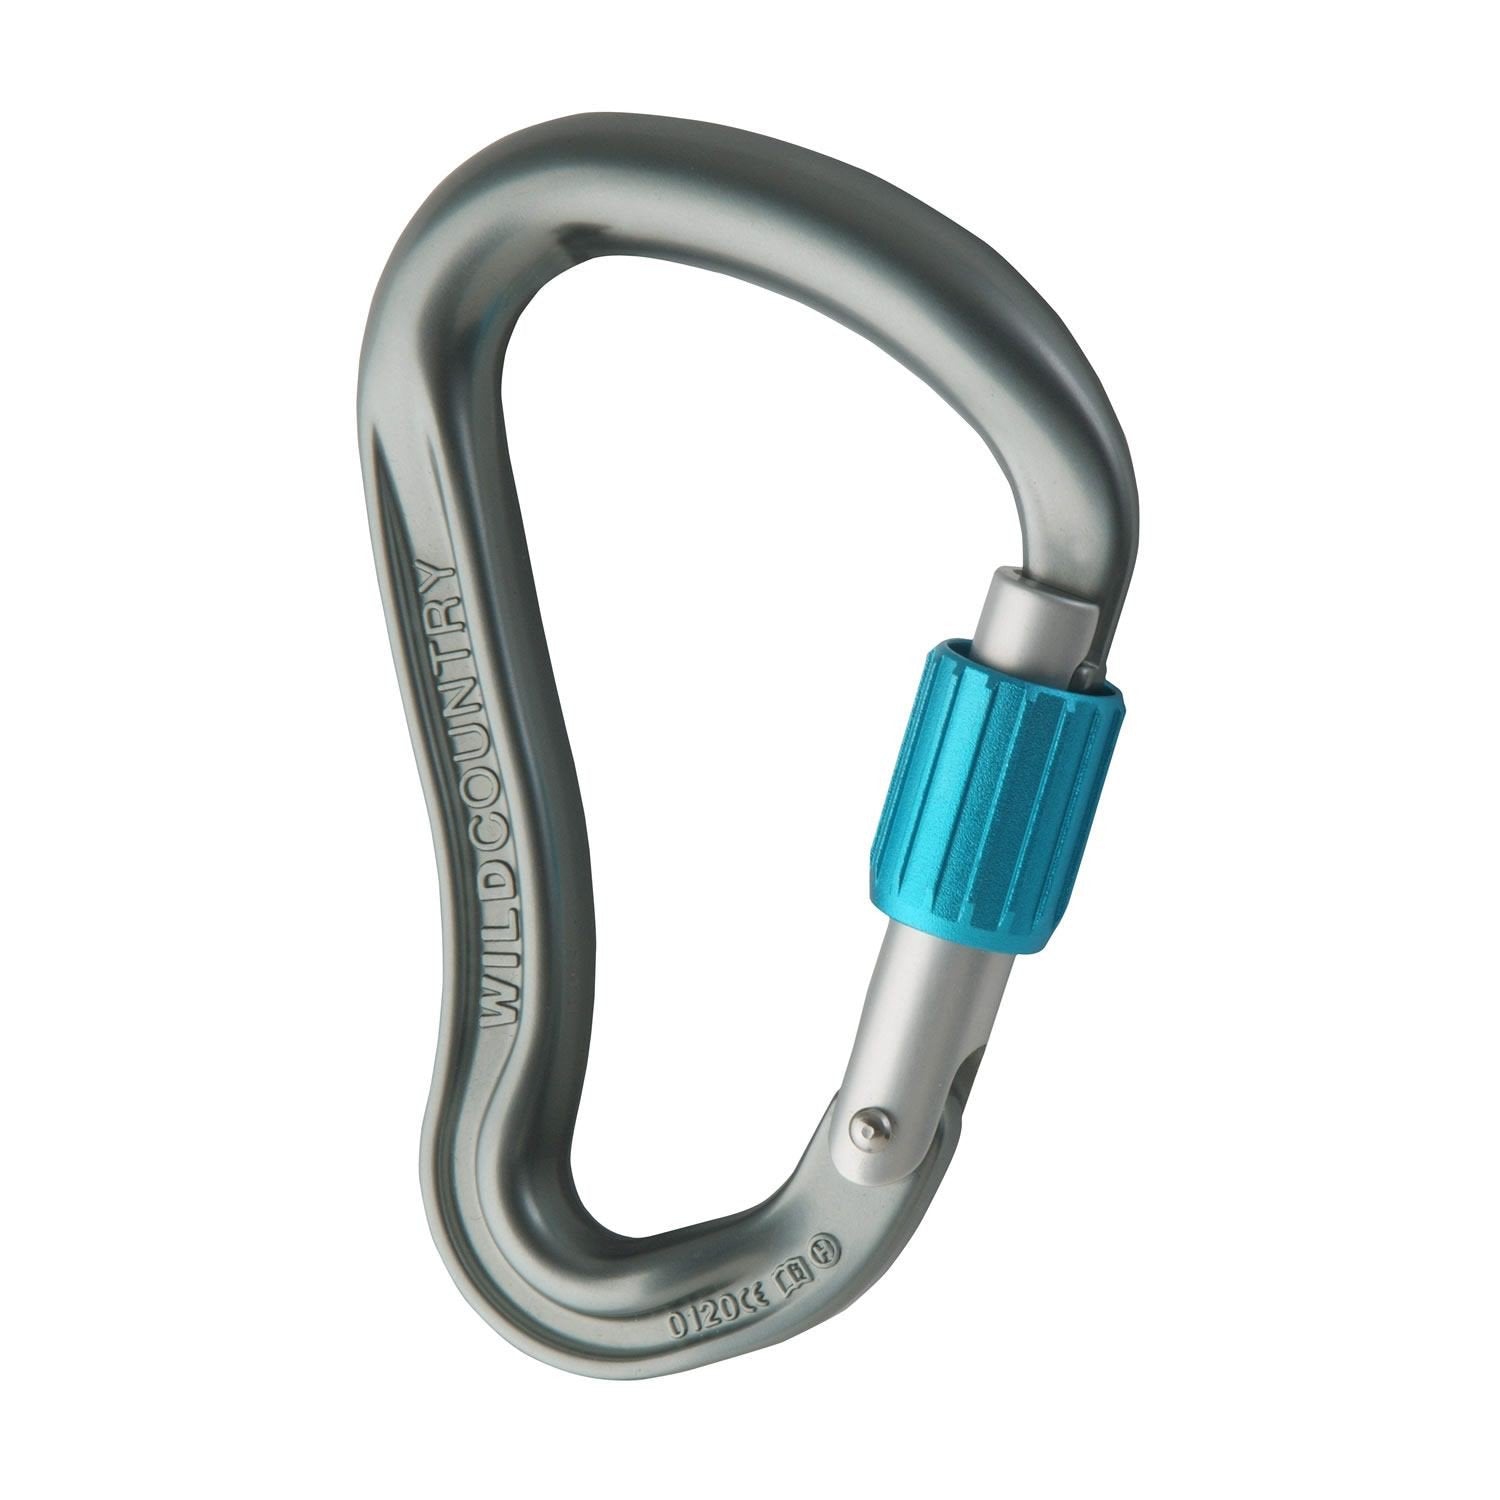 Wild Country Ascent Lite climbing carabiner, in gun metal grey colour with a blue screwlock